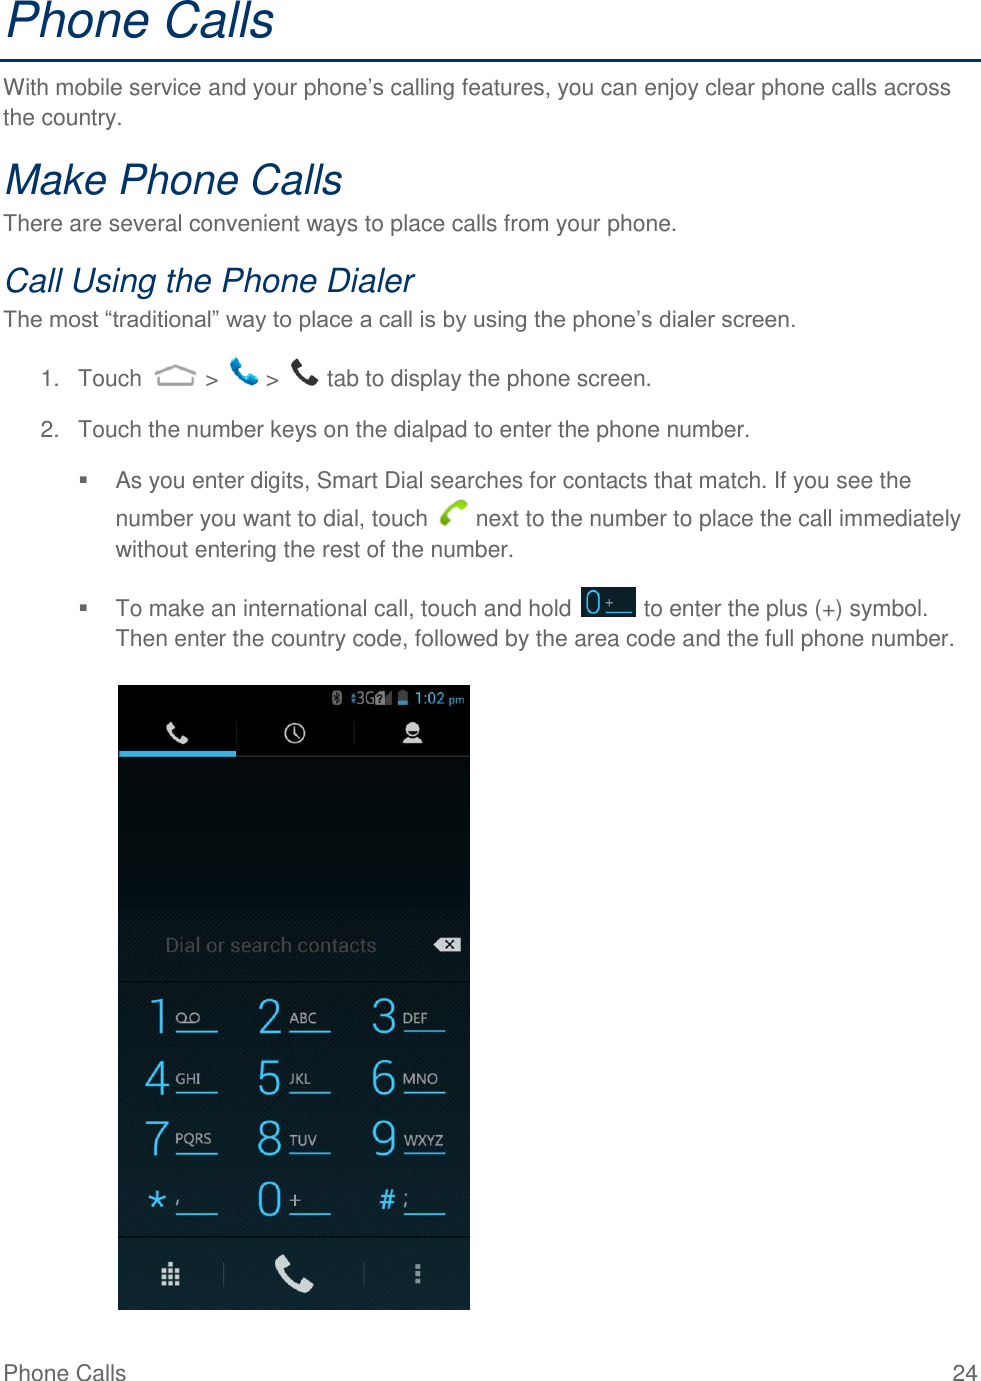 Phone Calls  24 Phone Calls With mobile service and your phone’s calling features, you can enjoy clear phone calls across the country. Make Phone Calls There are several convenient ways to place calls from your phone. Call Using the Phone Dialer The most “traditional” way to place a call is by using the phone’s dialer screen.  1.  Touch   &gt;   &gt;   tab to display the phone screen. 2.  Touch the number keys on the dialpad to enter the phone number.   As you enter digits, Smart Dial searches for contacts that match. If you see the number you want to dial, touch   next to the number to place the call immediately without entering the rest of the number.   To make an international call, touch and hold   to enter the plus (+) symbol. Then enter the country code, followed by the area code and the full phone number.   